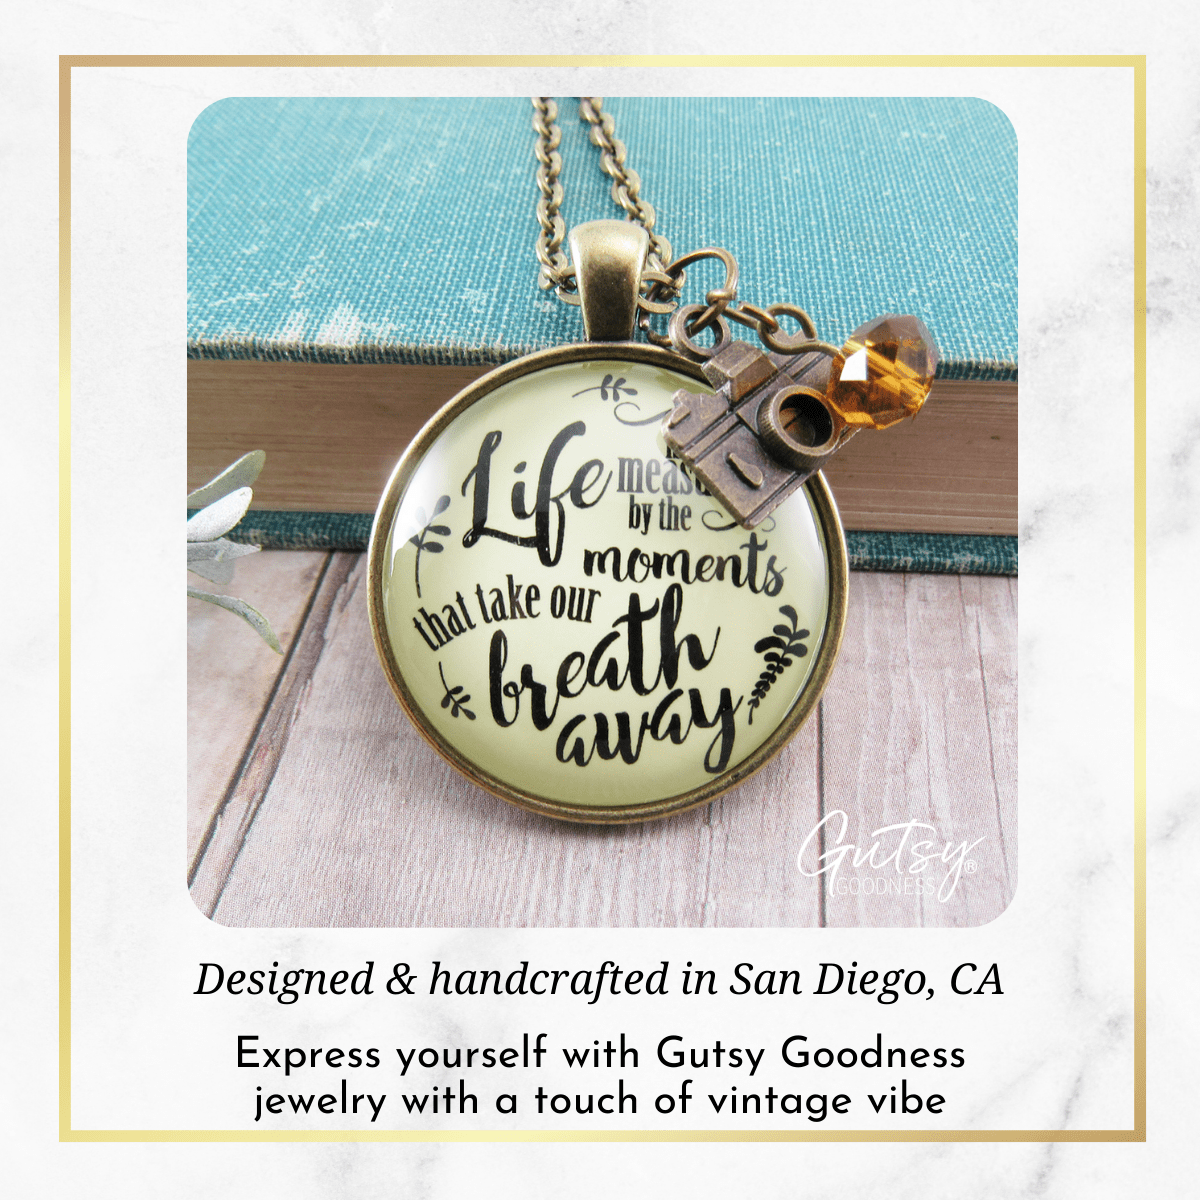 Gutsy Goodness Life Necklace Measured By Moments That Take Our Breath Away Jewelry - Gutsy Goodness;Life Necklace Measured By Moments That Take Our Breath Away Jewelry - Gutsy Goodness Handmade Jewelry Gifts